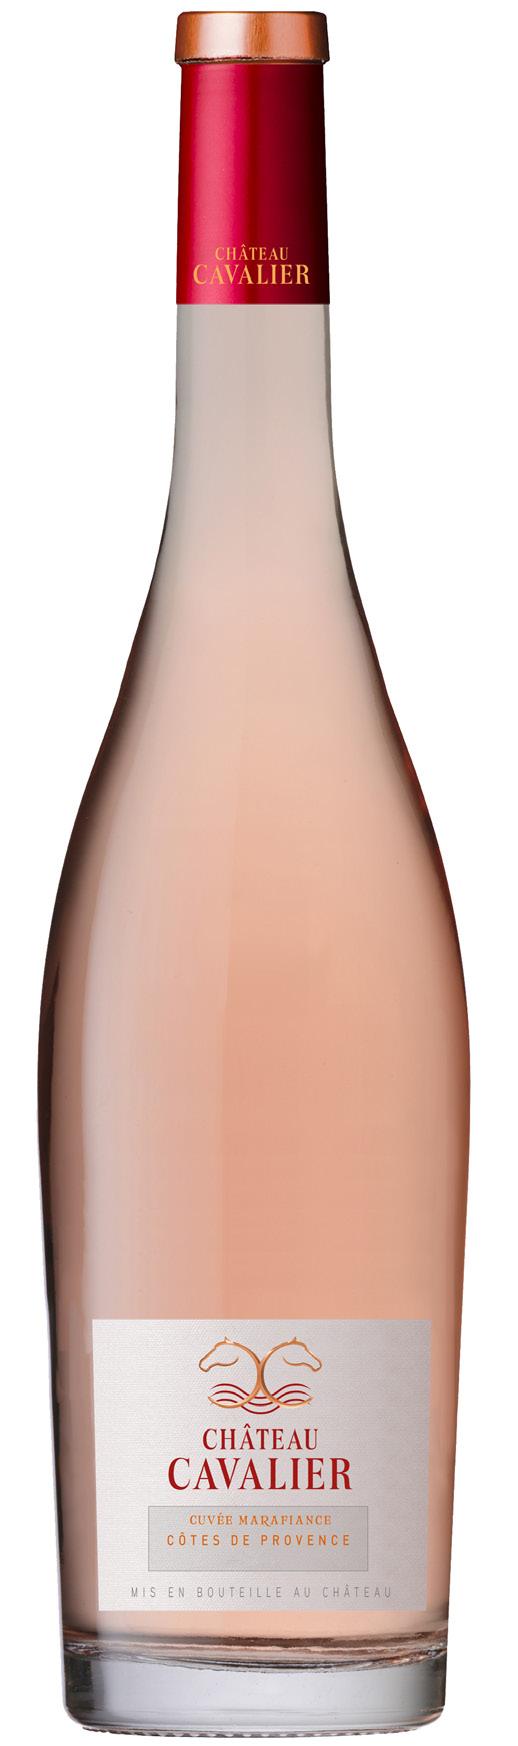 Château Cavalier Côtes de Provence Cuvée Marafiance This rose wine originates from france. High quality mechanical harvests, carried out overnight to avoid risk of oxidation.